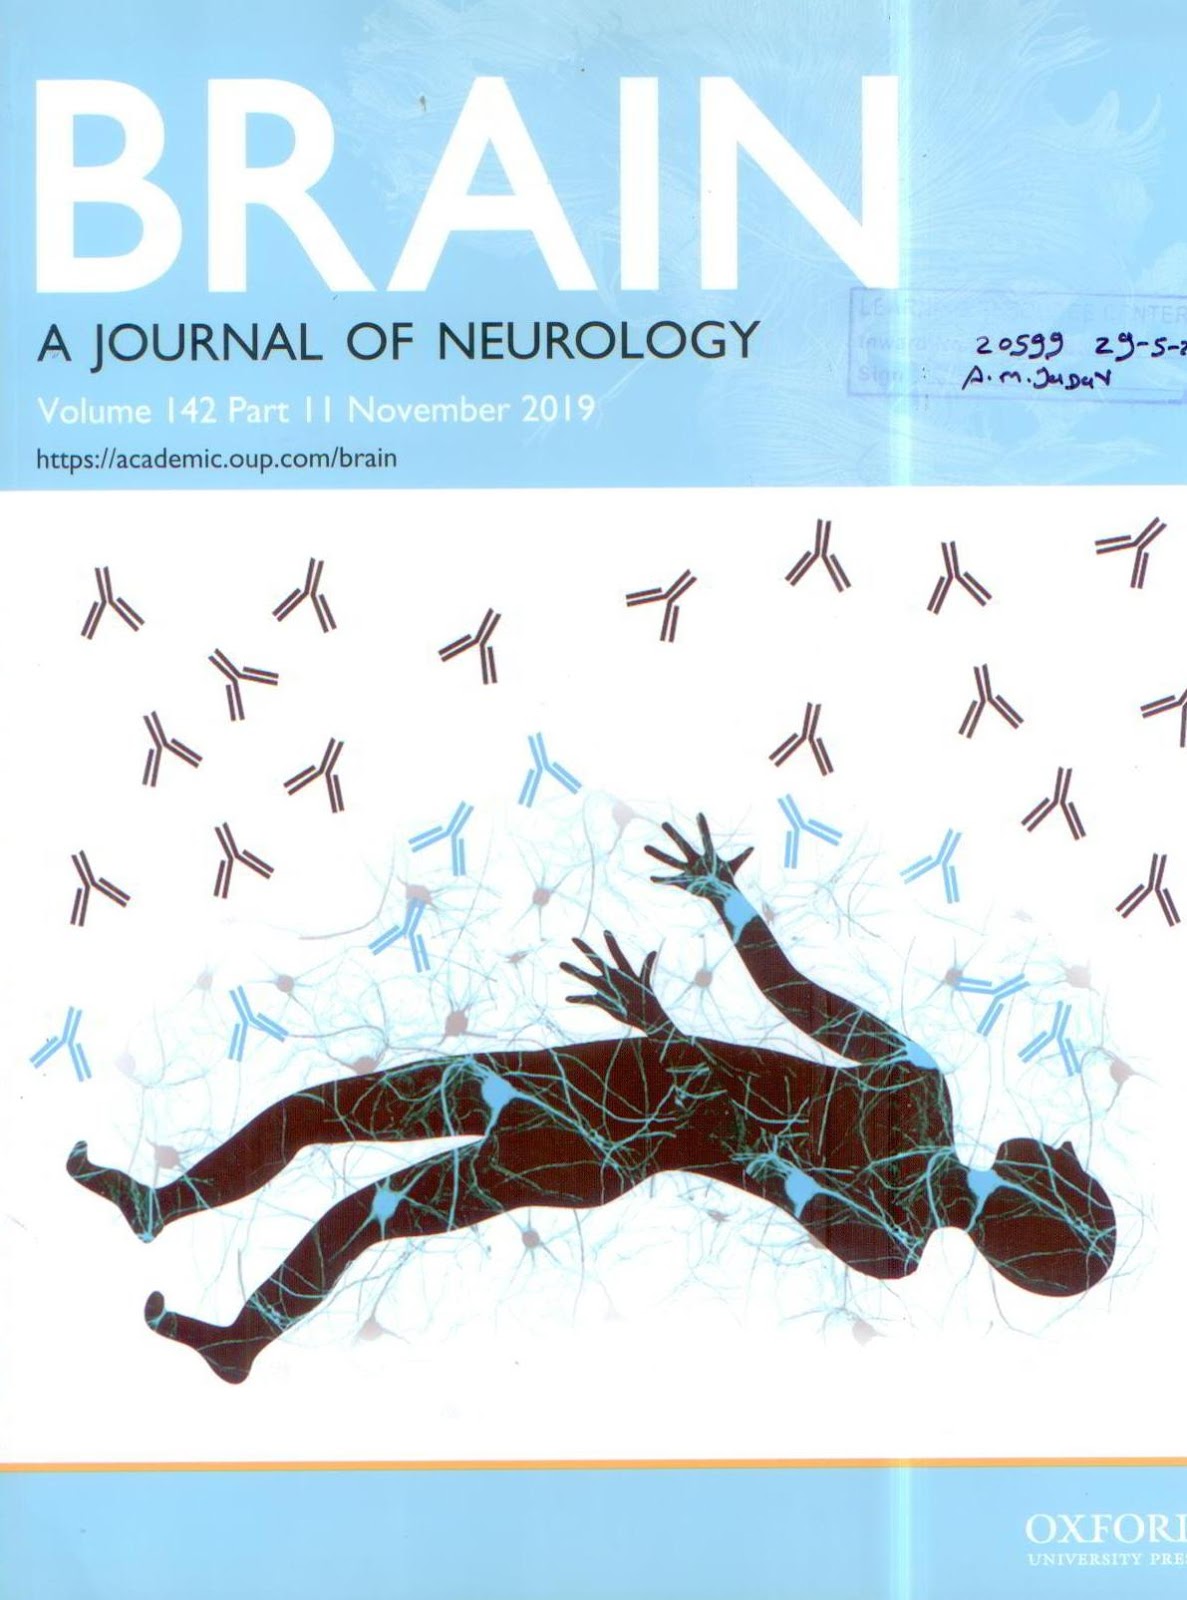 https://academic.oup.com/brain/issue/142/11